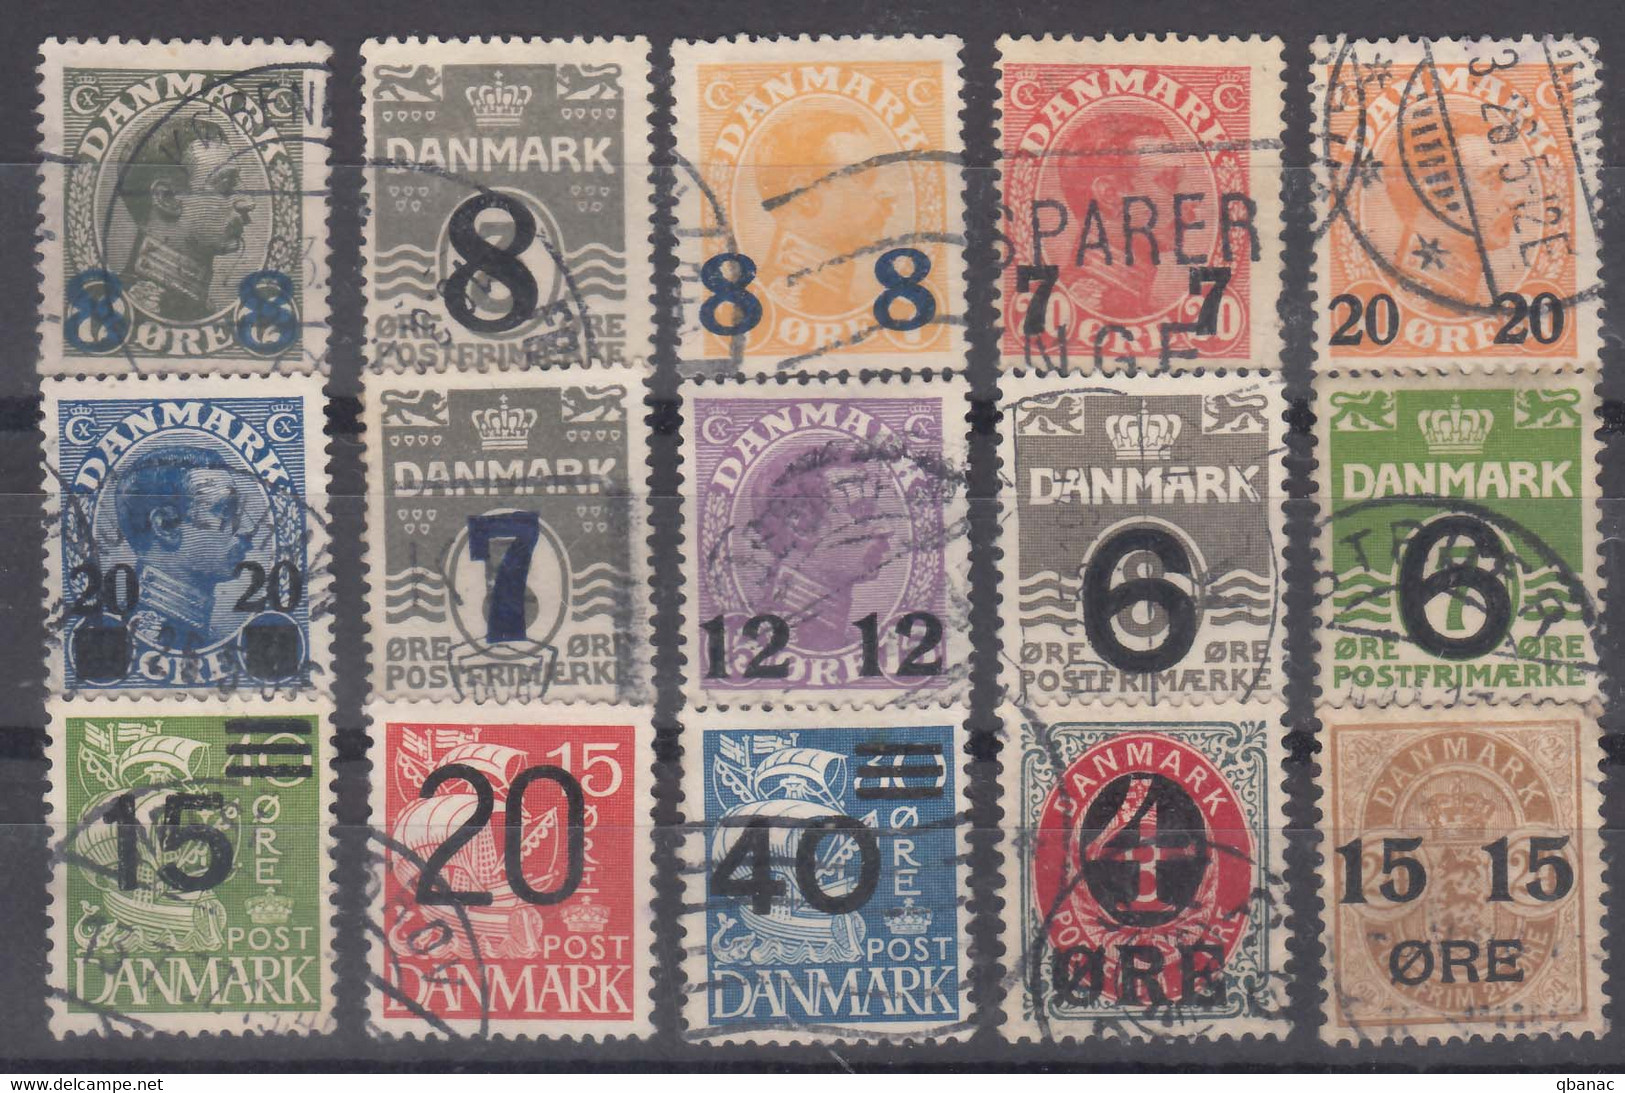 Denmark Overprint Stamps From Different Years, 1904,1921,1926,1940 Used - Gebraucht